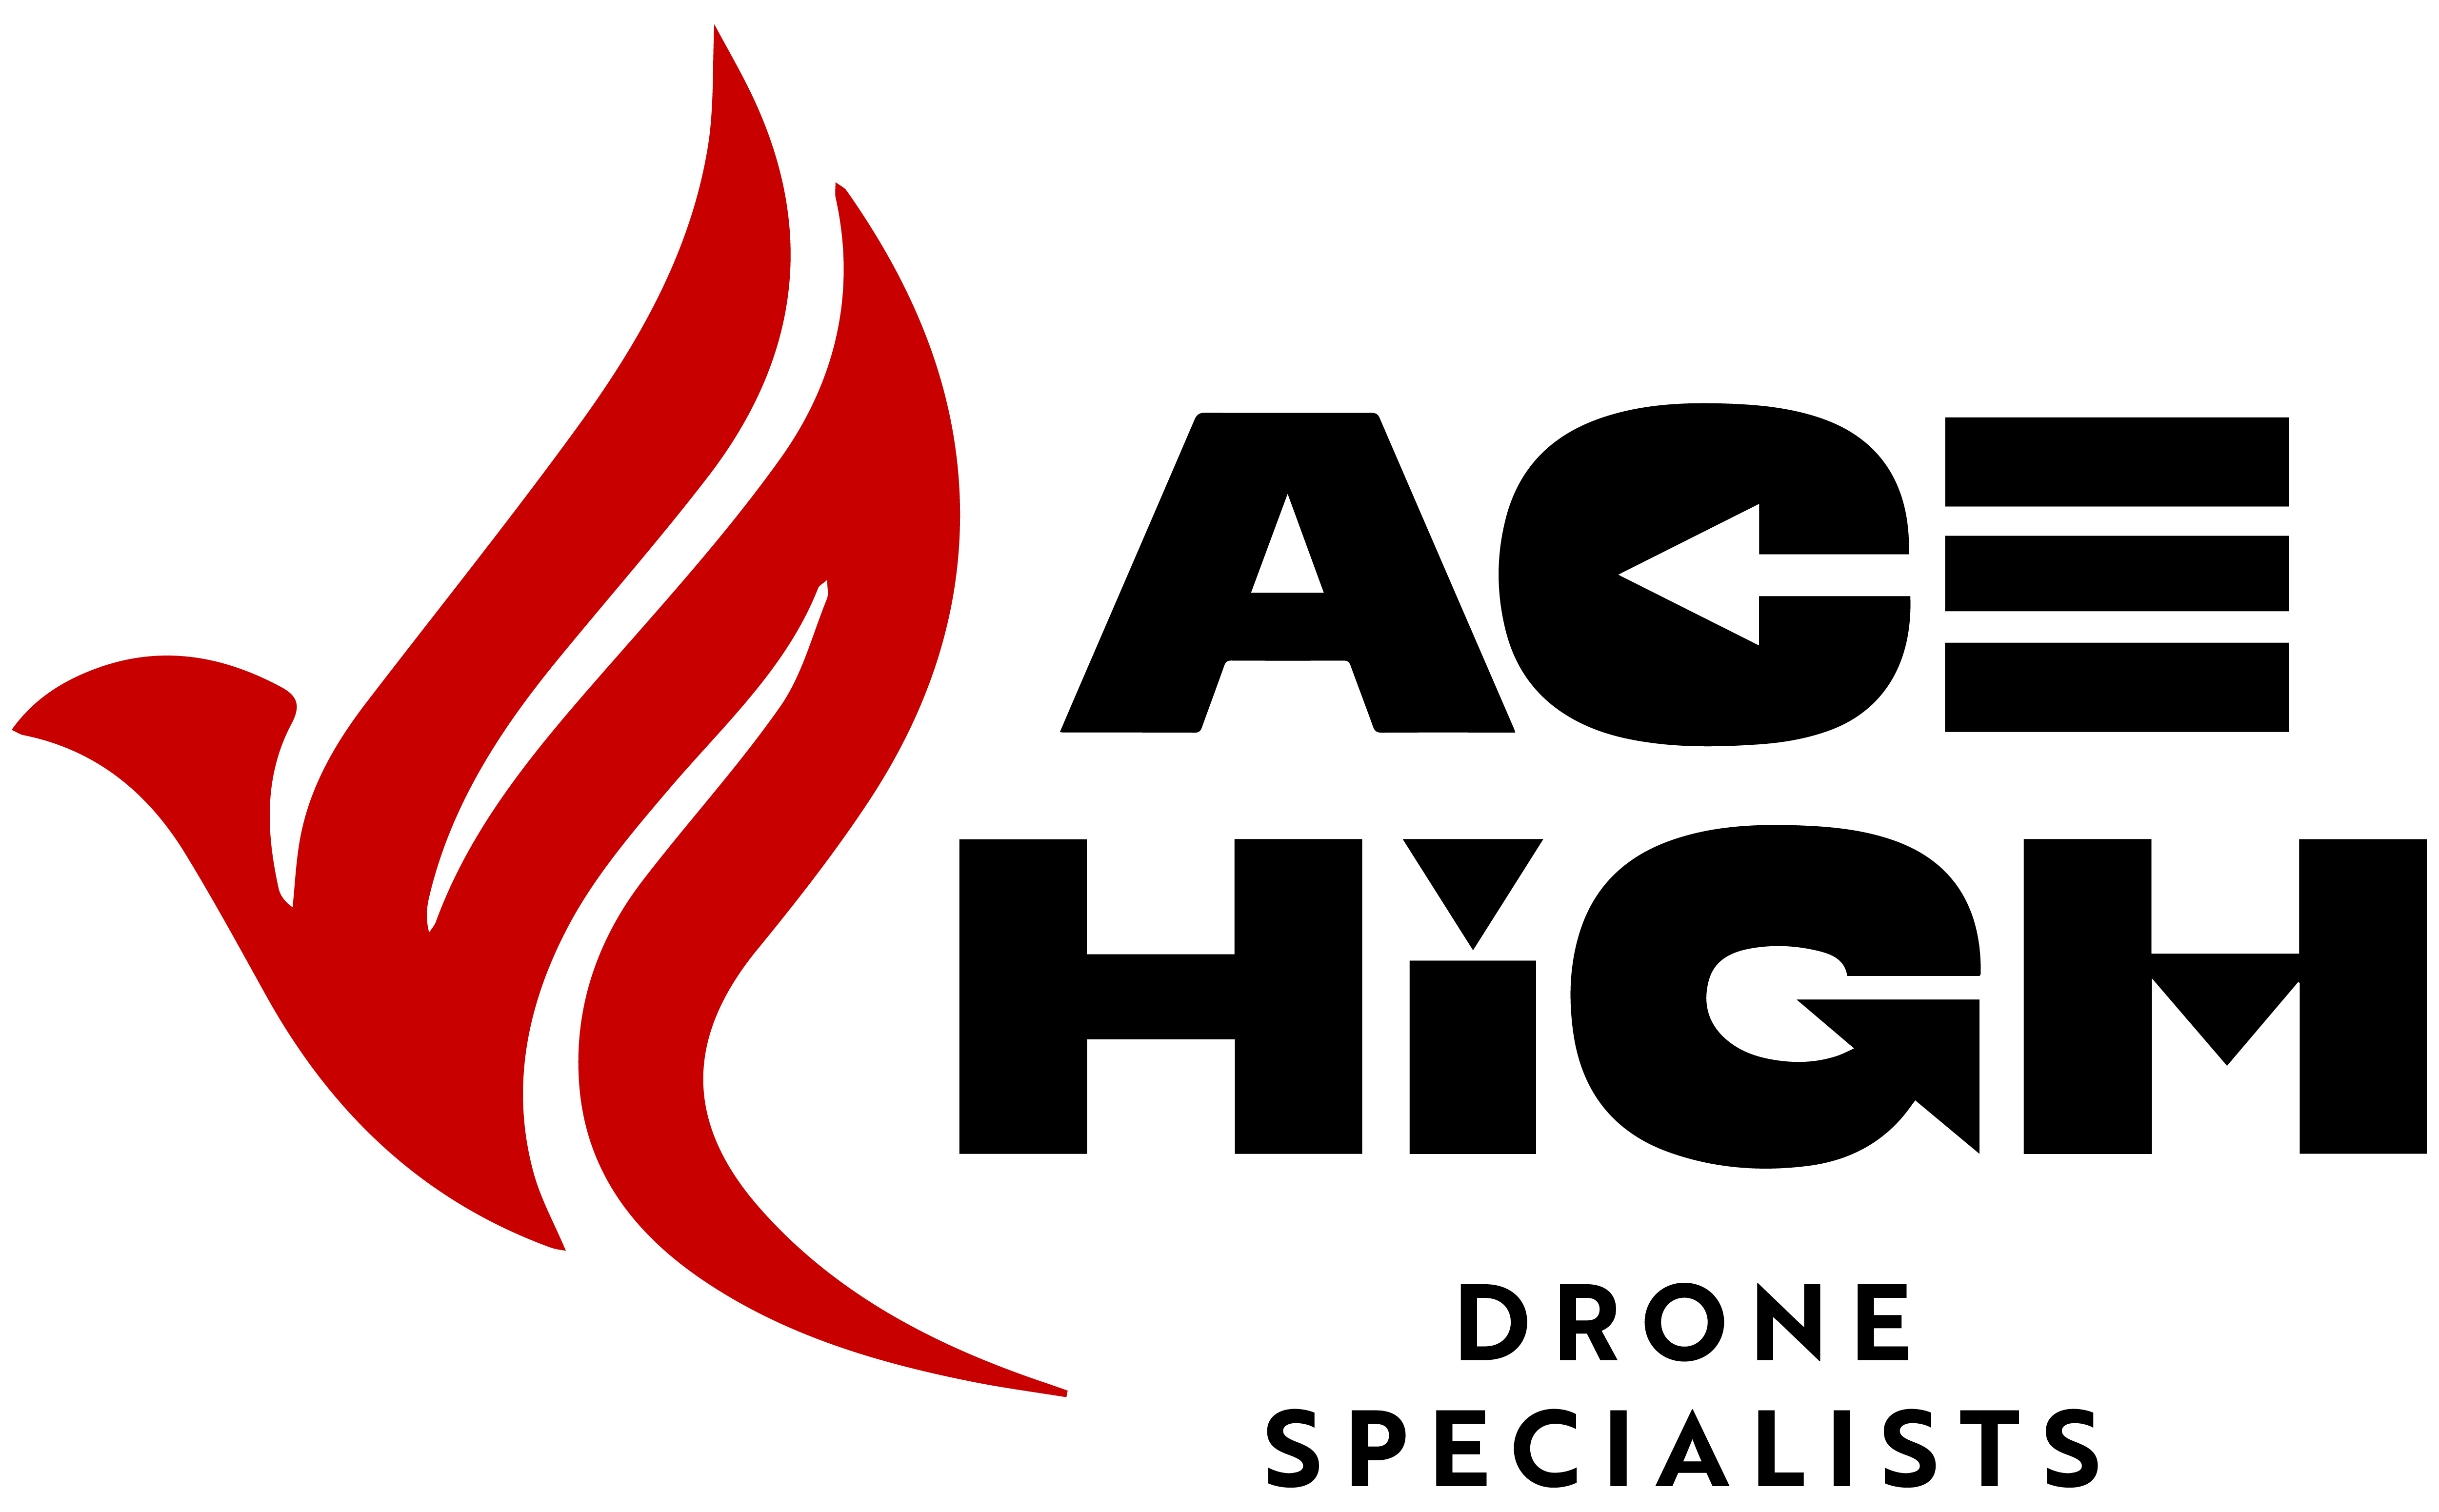 ACE HIGH DRONE SPECIALISTS